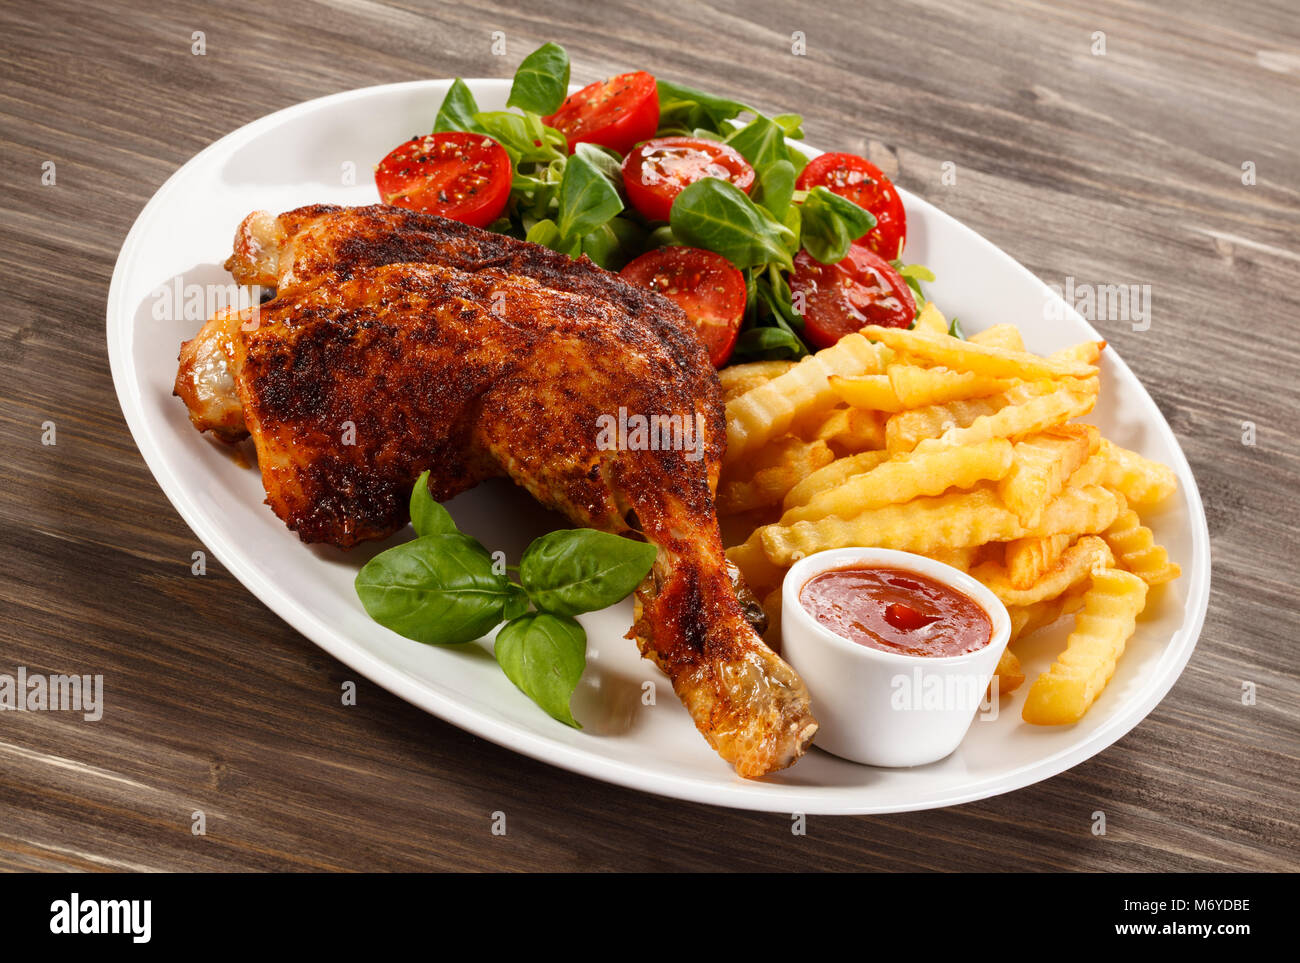 Roast chicken legs with french fries Stock Photo - Alamy